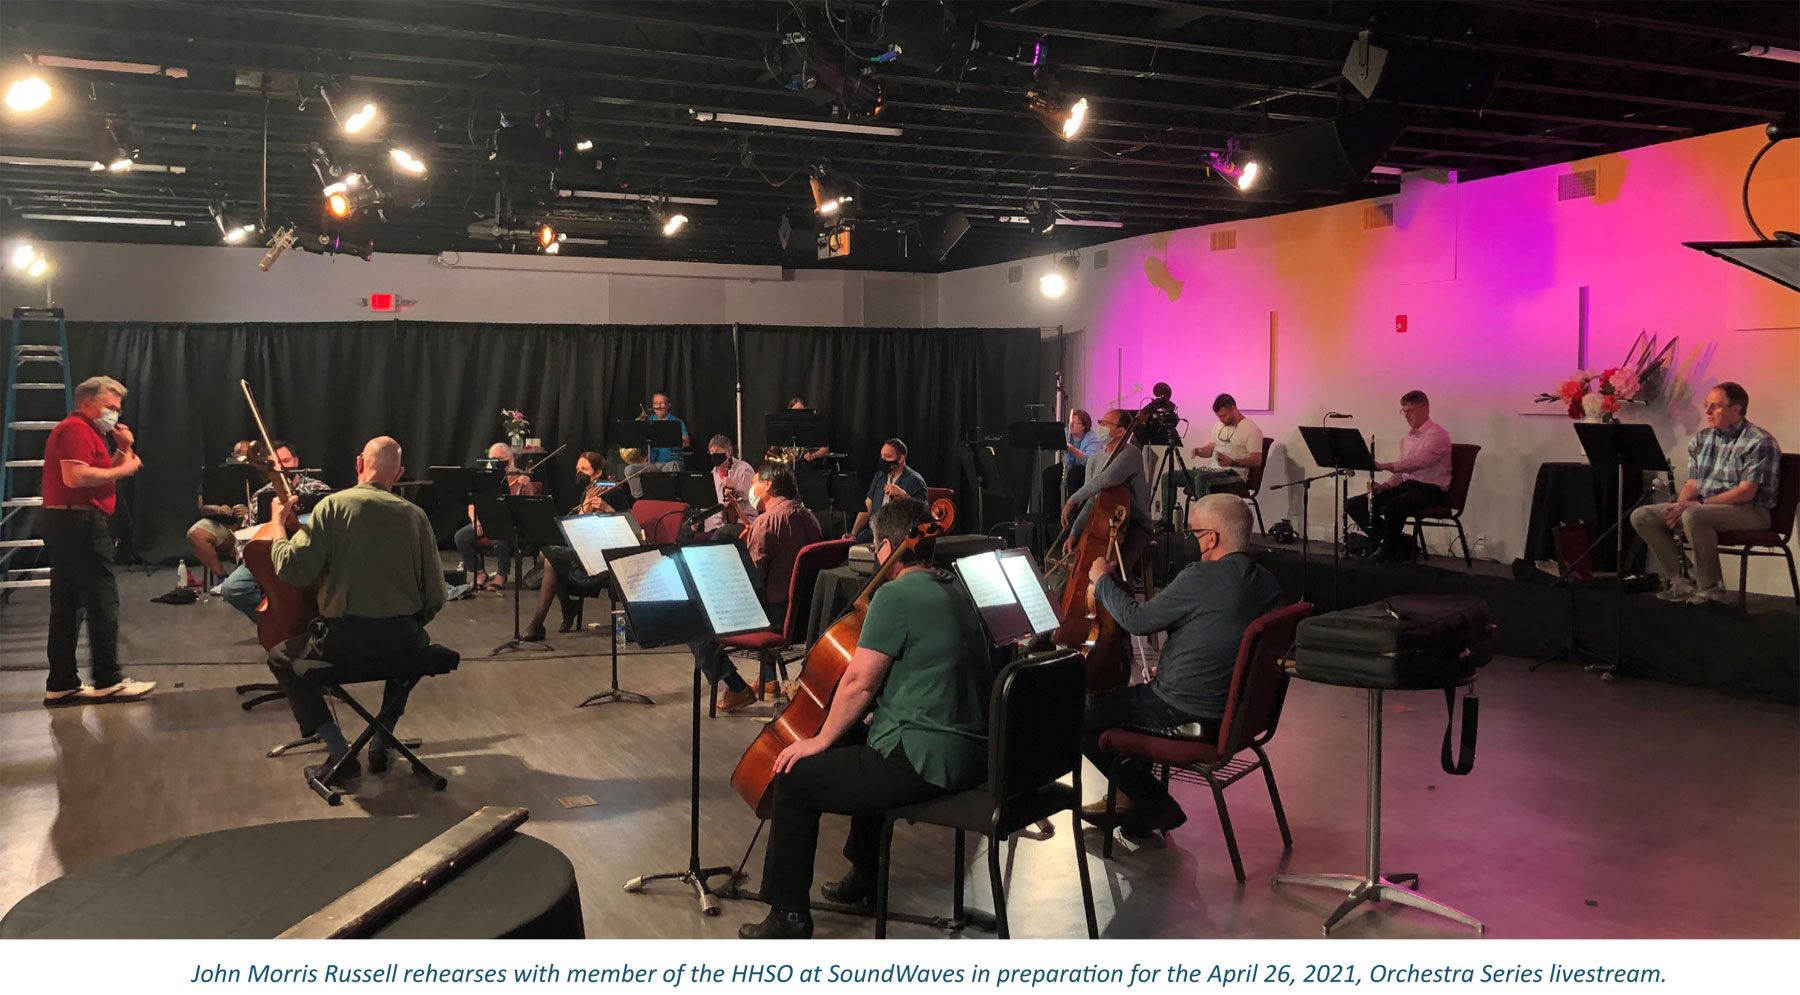 John Morris Russell rehearses with member of the HHSO at SoundWaves in preparation for the April 26, 2021, Orchestra Series livestream. 